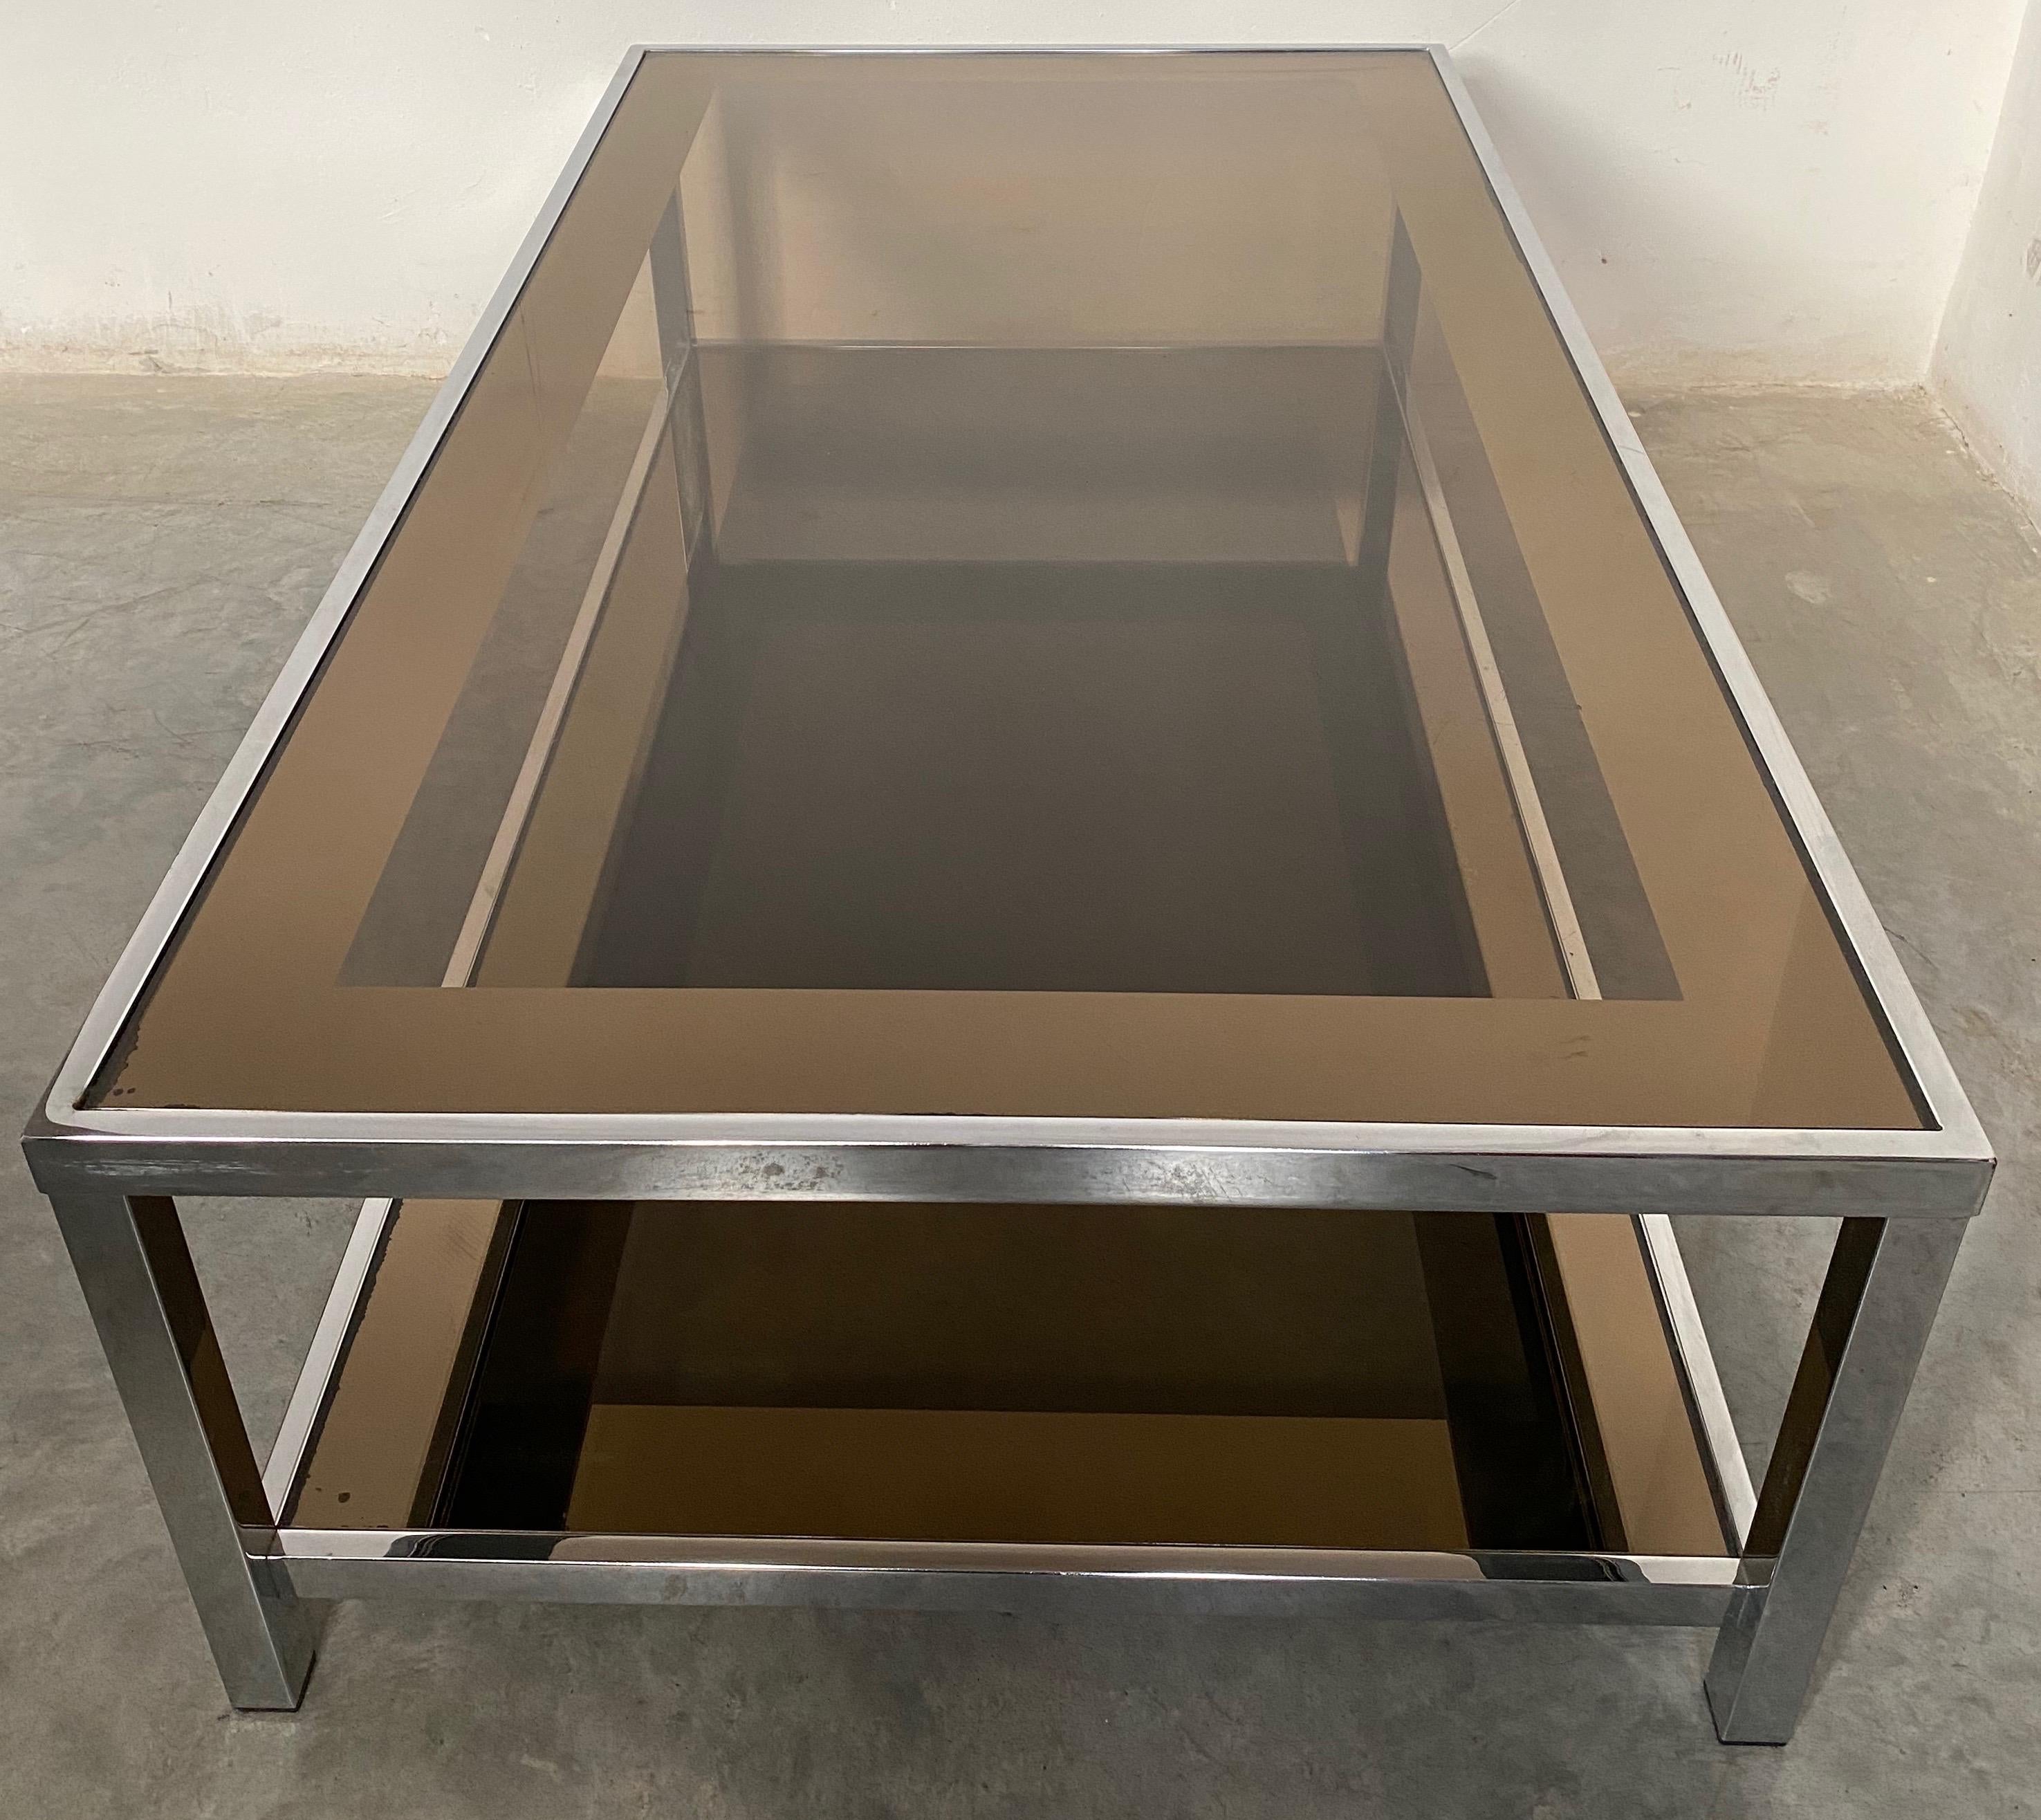 Belgo Chrome was well known for its handsome clean designs in metals and mirror. This 1980s coffee table is iconic of their designs. The 2 smoked glass tops are smoked glass and have a mirrored bronze border 7 cm wide. The border further emphasizes